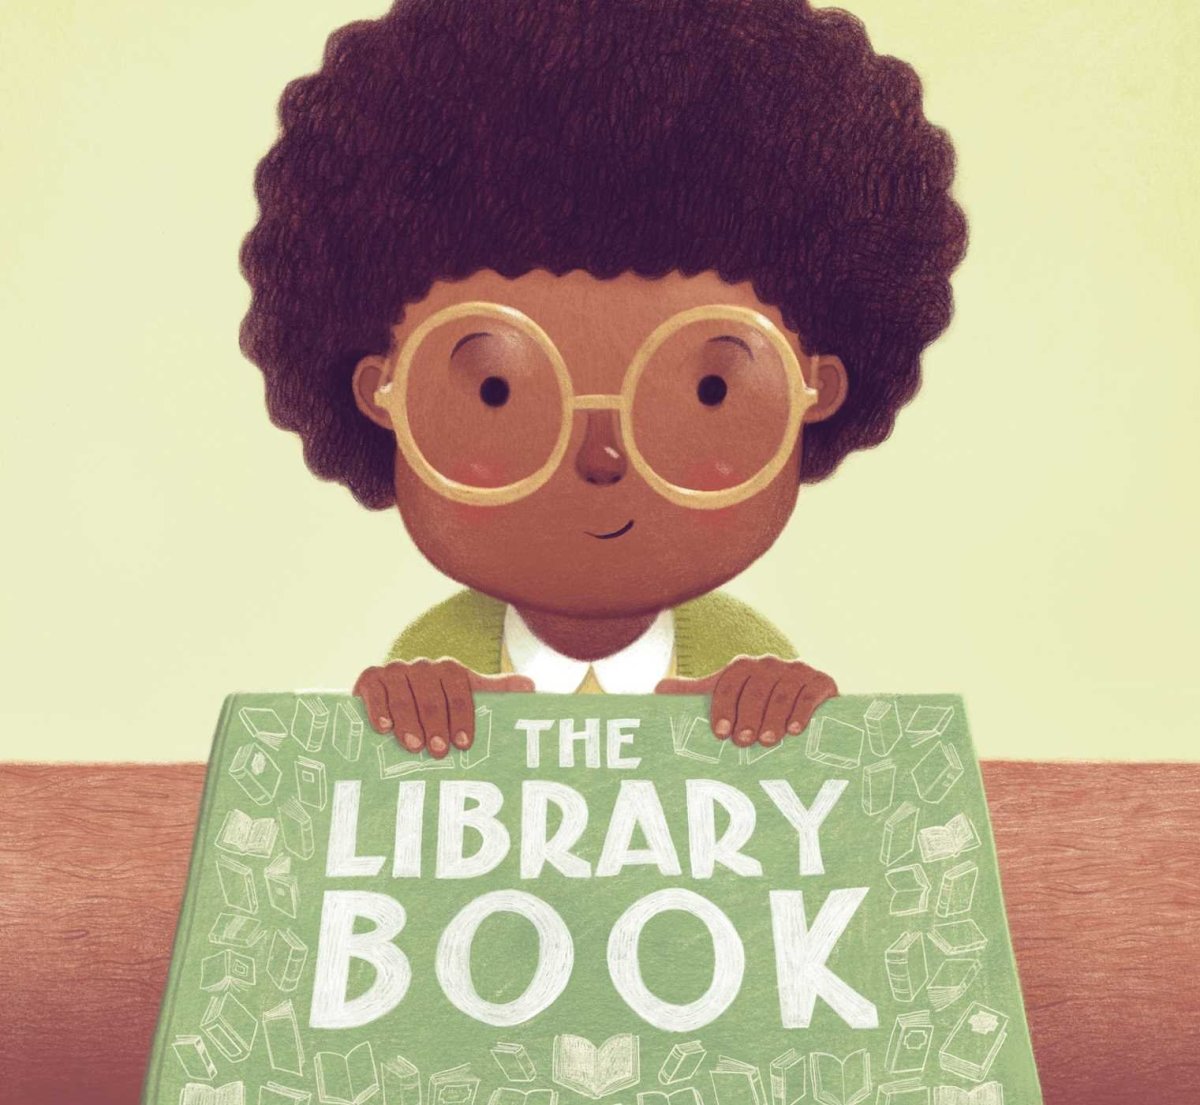 The Library Book by Tom Chapin and Michael Mark